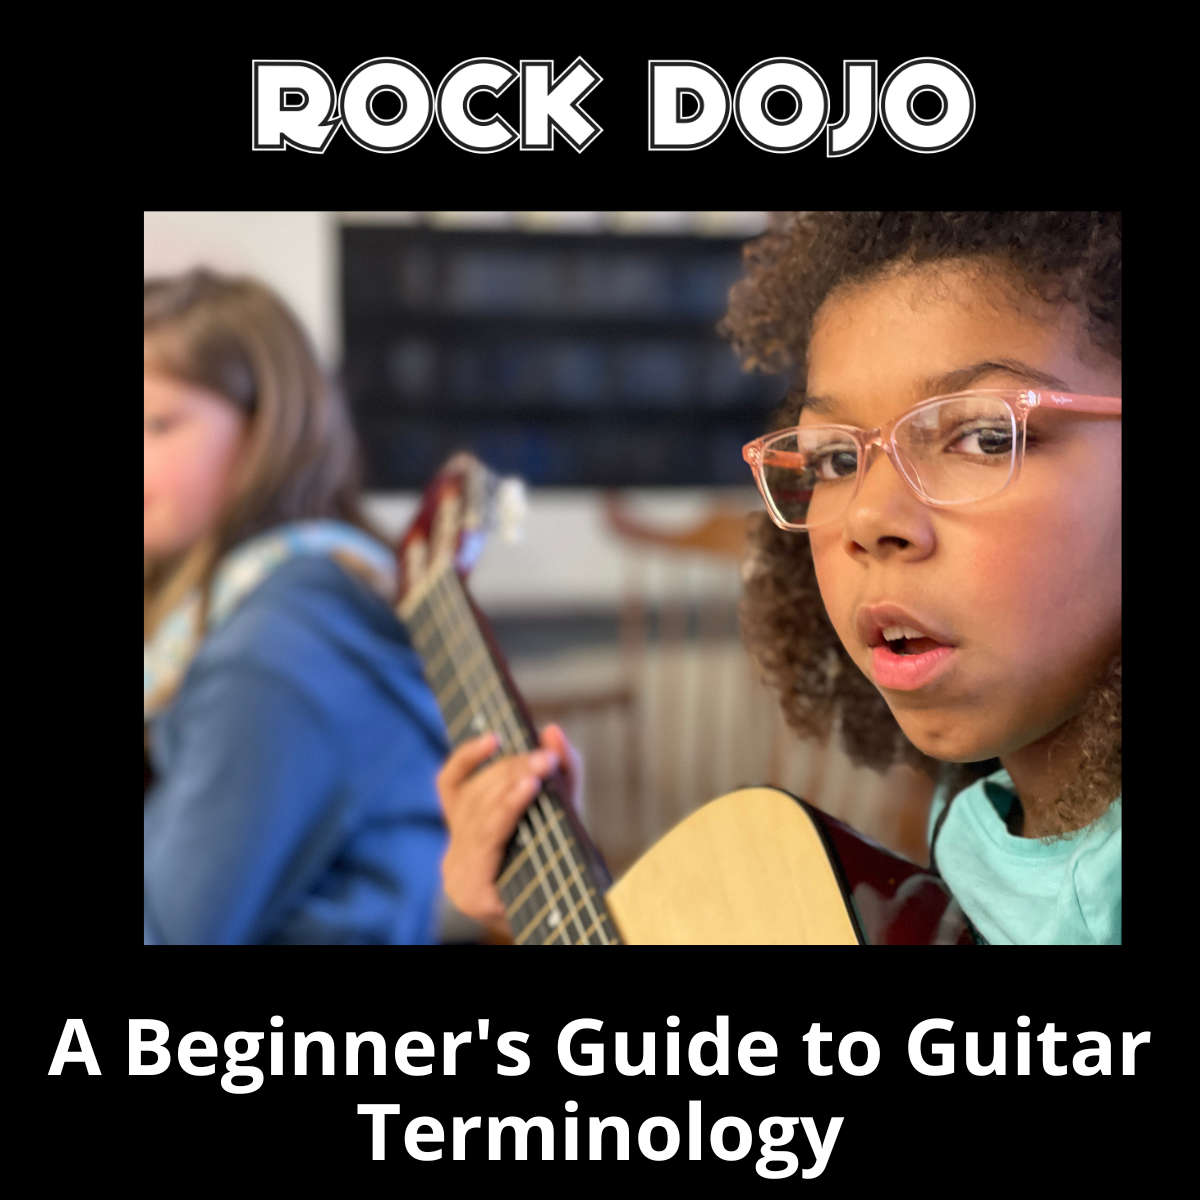 A child playing the guitar during Rock Dojo's after-school guitar lessons for children.